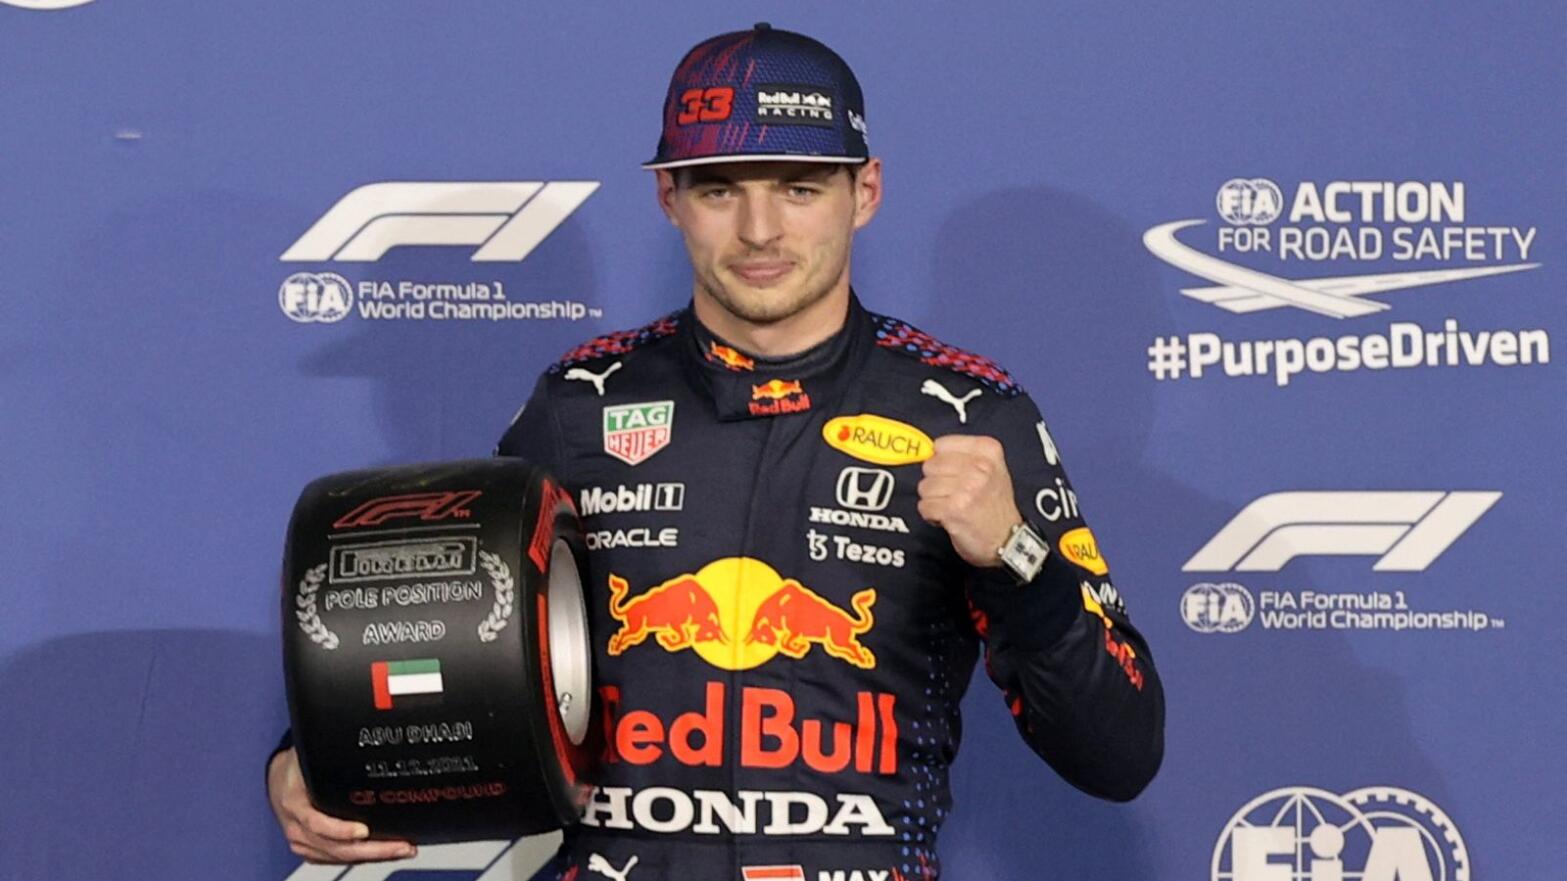 Red Bull's Max Verstappen poses with a tyre after qualifying in pole position for Sunday’s Abu Dhabi Grand Prix